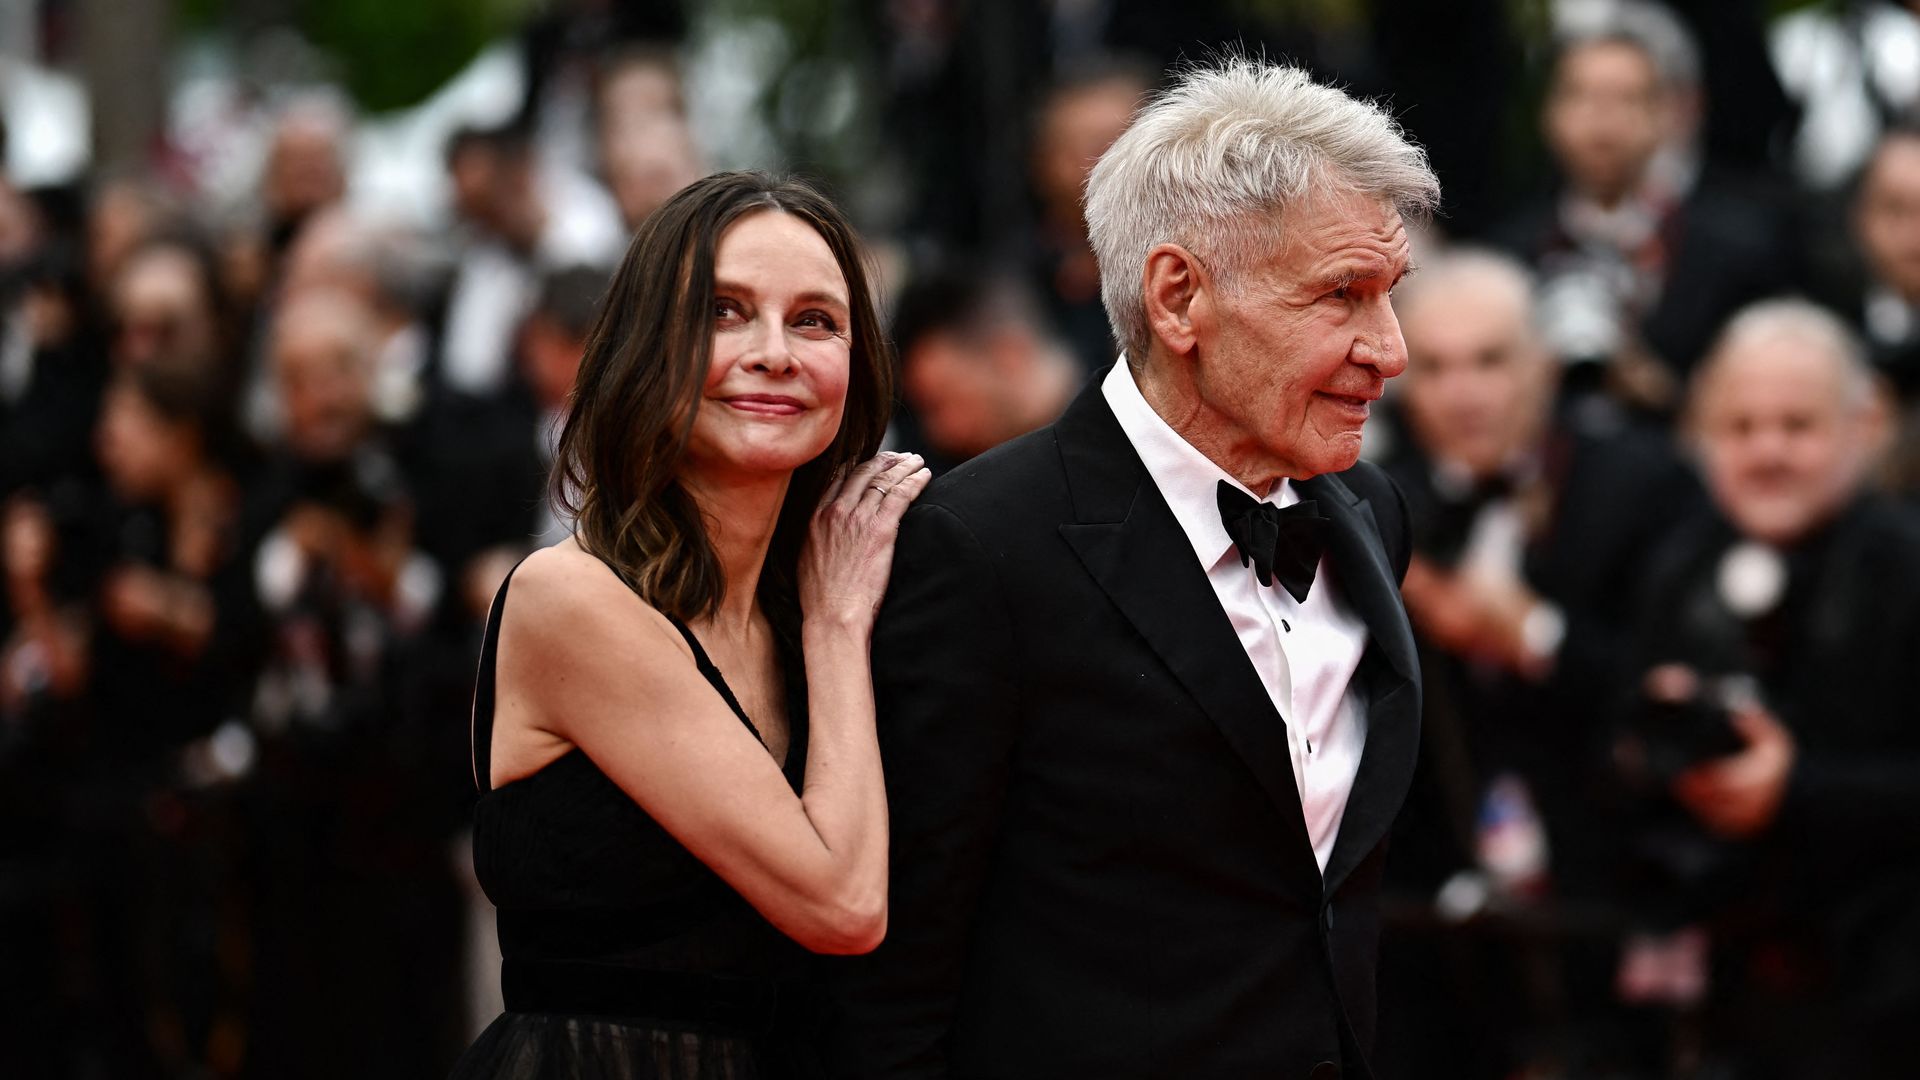 Harrison Ford and Calista Flockhart have been together since 2002